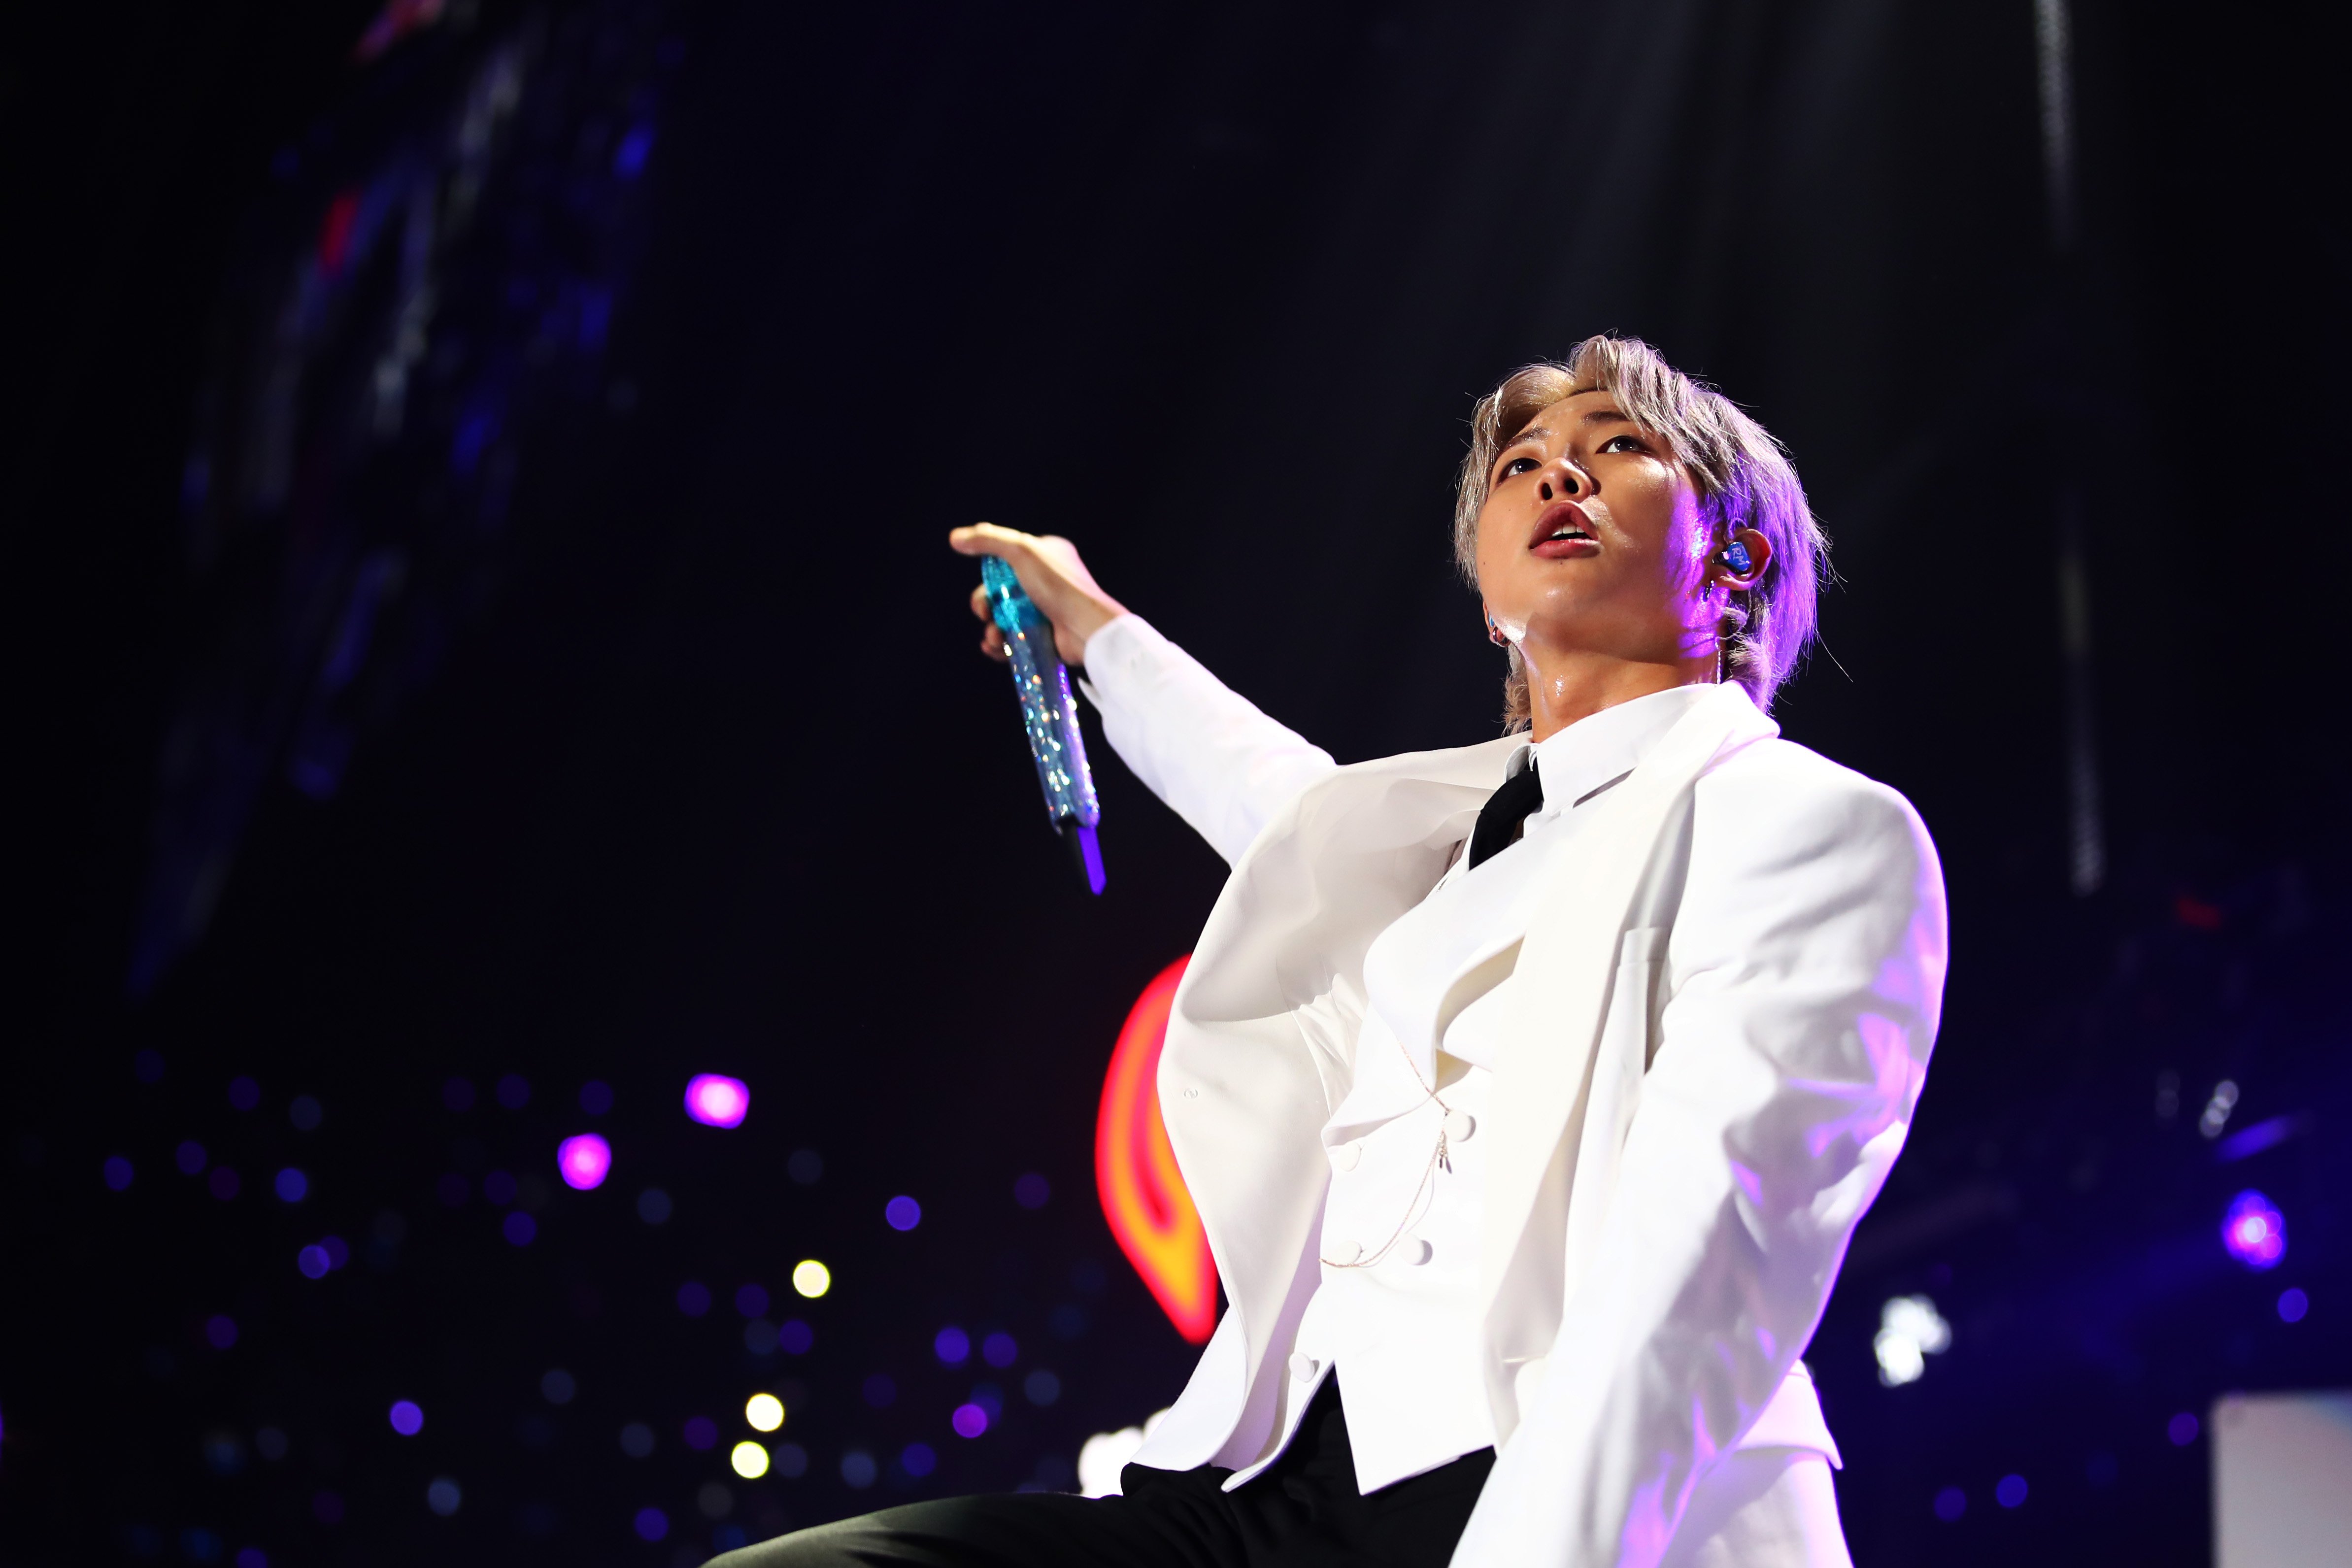 RM of BTS performs onstage during 102.7 KIIS FM's Jingle Ball 2019